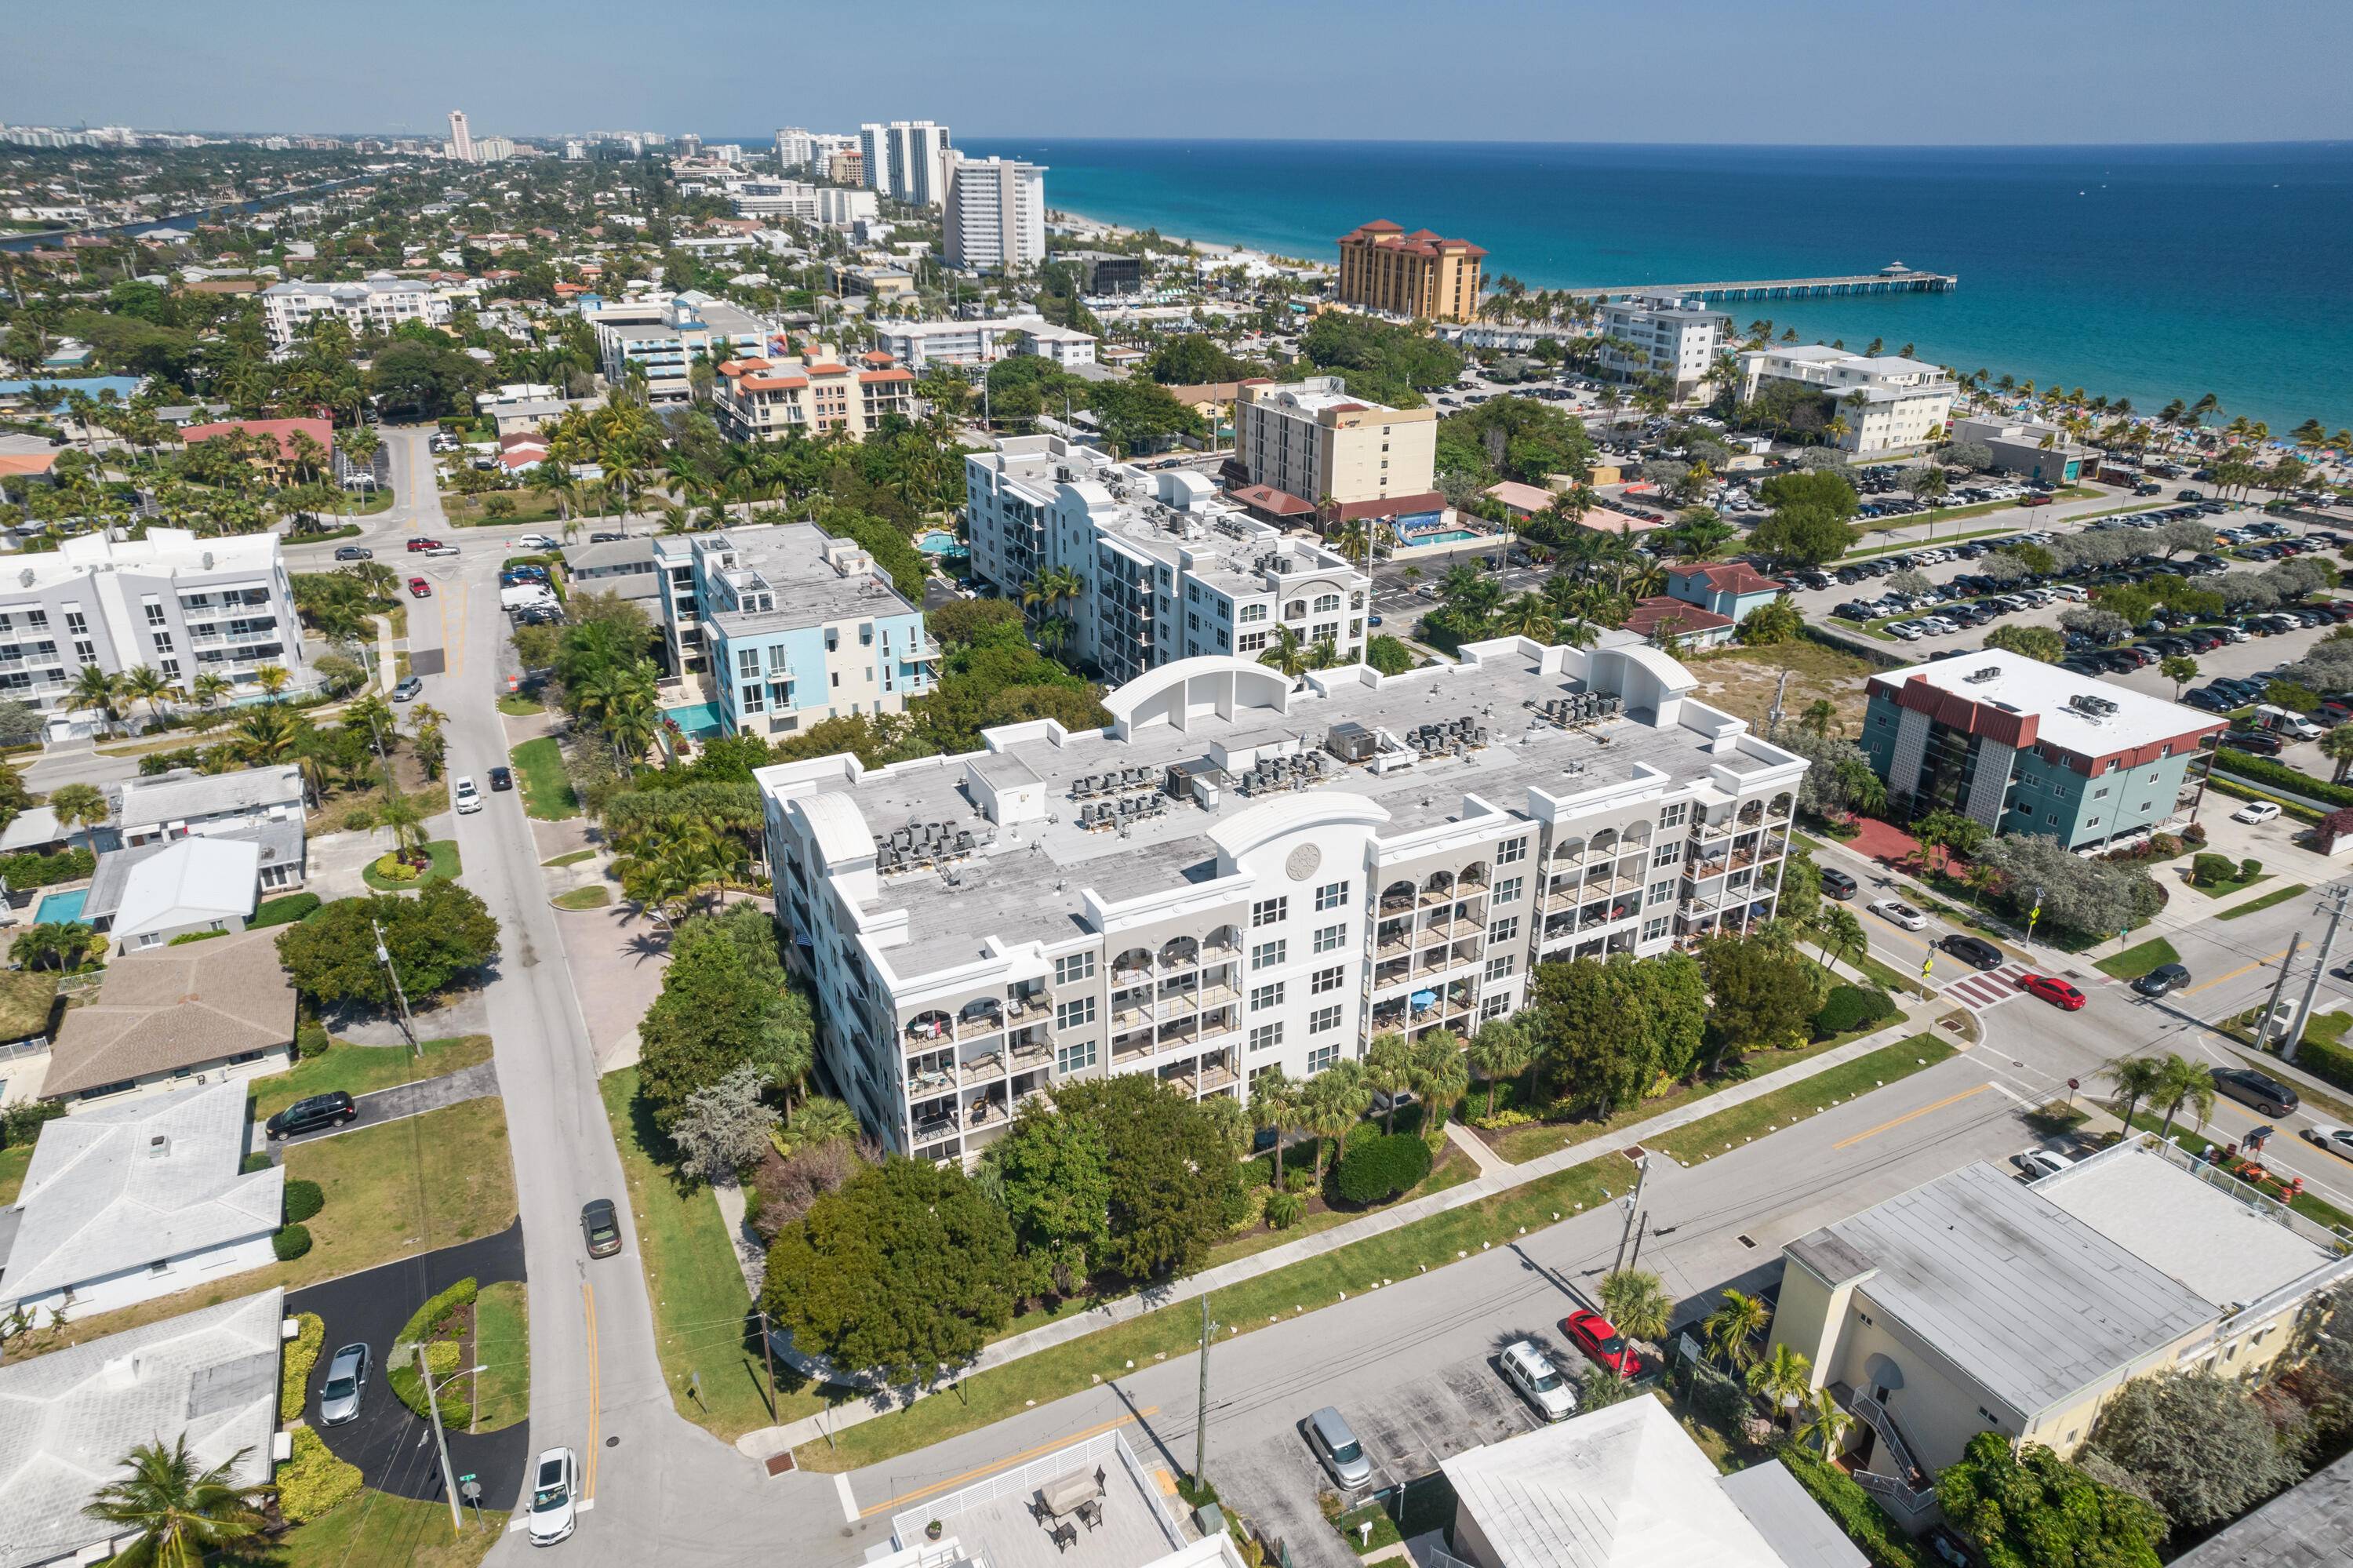 WELCOME TO 1 OCEAN BOULEVARD, A SOPHISTICATED URBAN LIFESTYLE LOCATED ONE BLOCK OFF OF THE FAMOUS DEERFIELD BEACH.